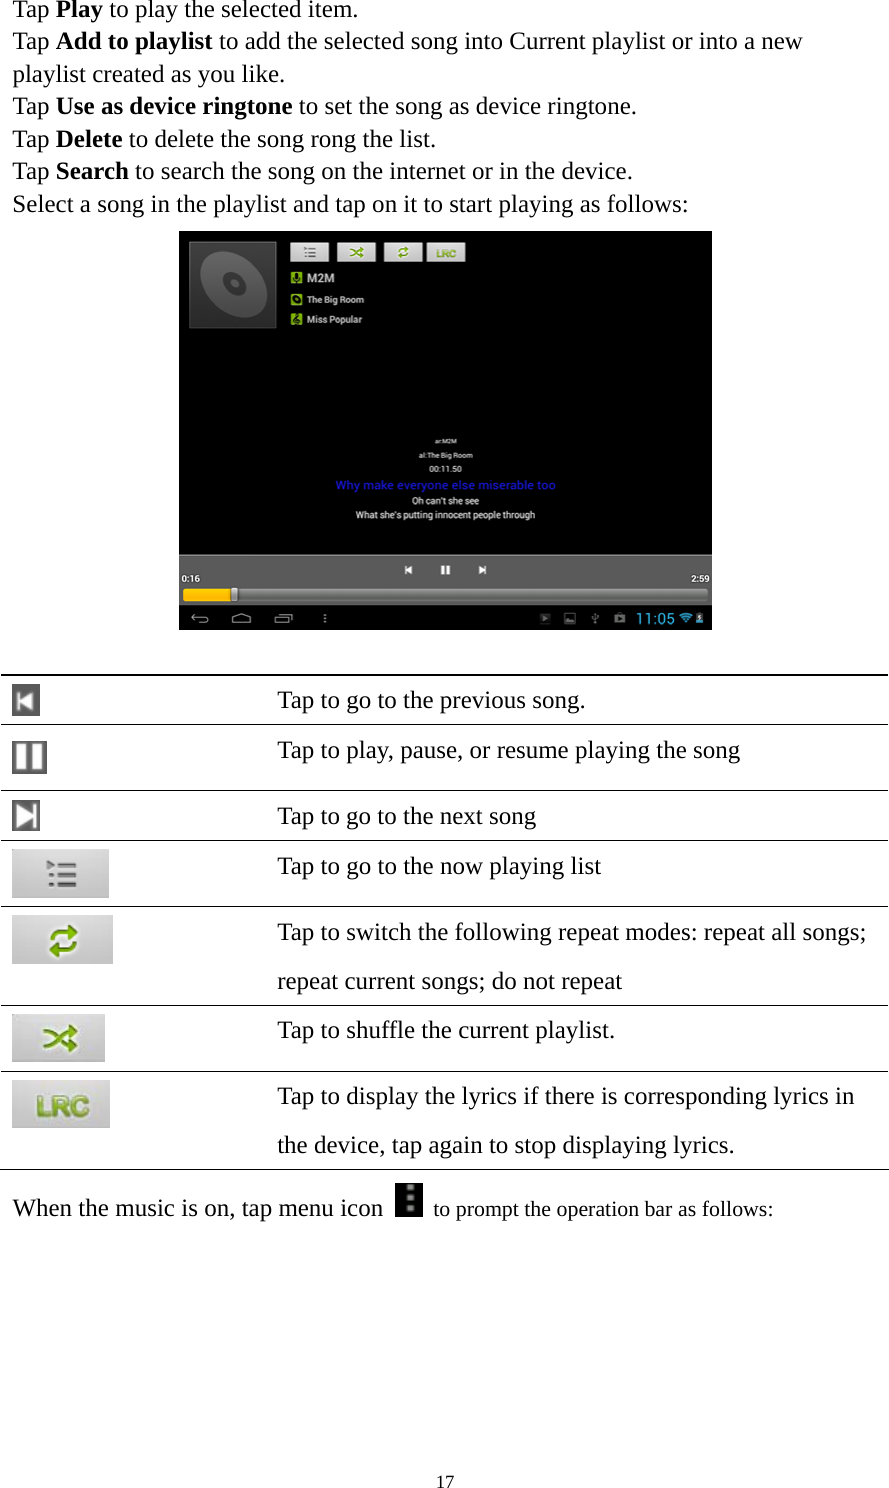 17 Tap Play to play the selected item. Tap Add to playlist to add the selected song into Current playlist or into a new playlist created as you like. Tap Use as device ringtone to set the song as device ringtone. Tap Delete to delete the song rong the list. Tap Search to search the song on the internet or in the device.   Select a song in the playlist and tap on it to start playing as follows:      Tap to go to the previous song.  Tap to play, pause, or resume playing the song  Tap to go to the next song  Tap to go to the now playing list  Tap to switch the following repeat modes: repeat all songs;   repeat current songs; do not repeat  Tap to shuffle the current playlist.  Tap to display the lyrics if there is corresponding lyrics in the device, tap again to stop displaying lyrics.   When the music is on, tap menu icon    to prompt the operation bar as follows:   